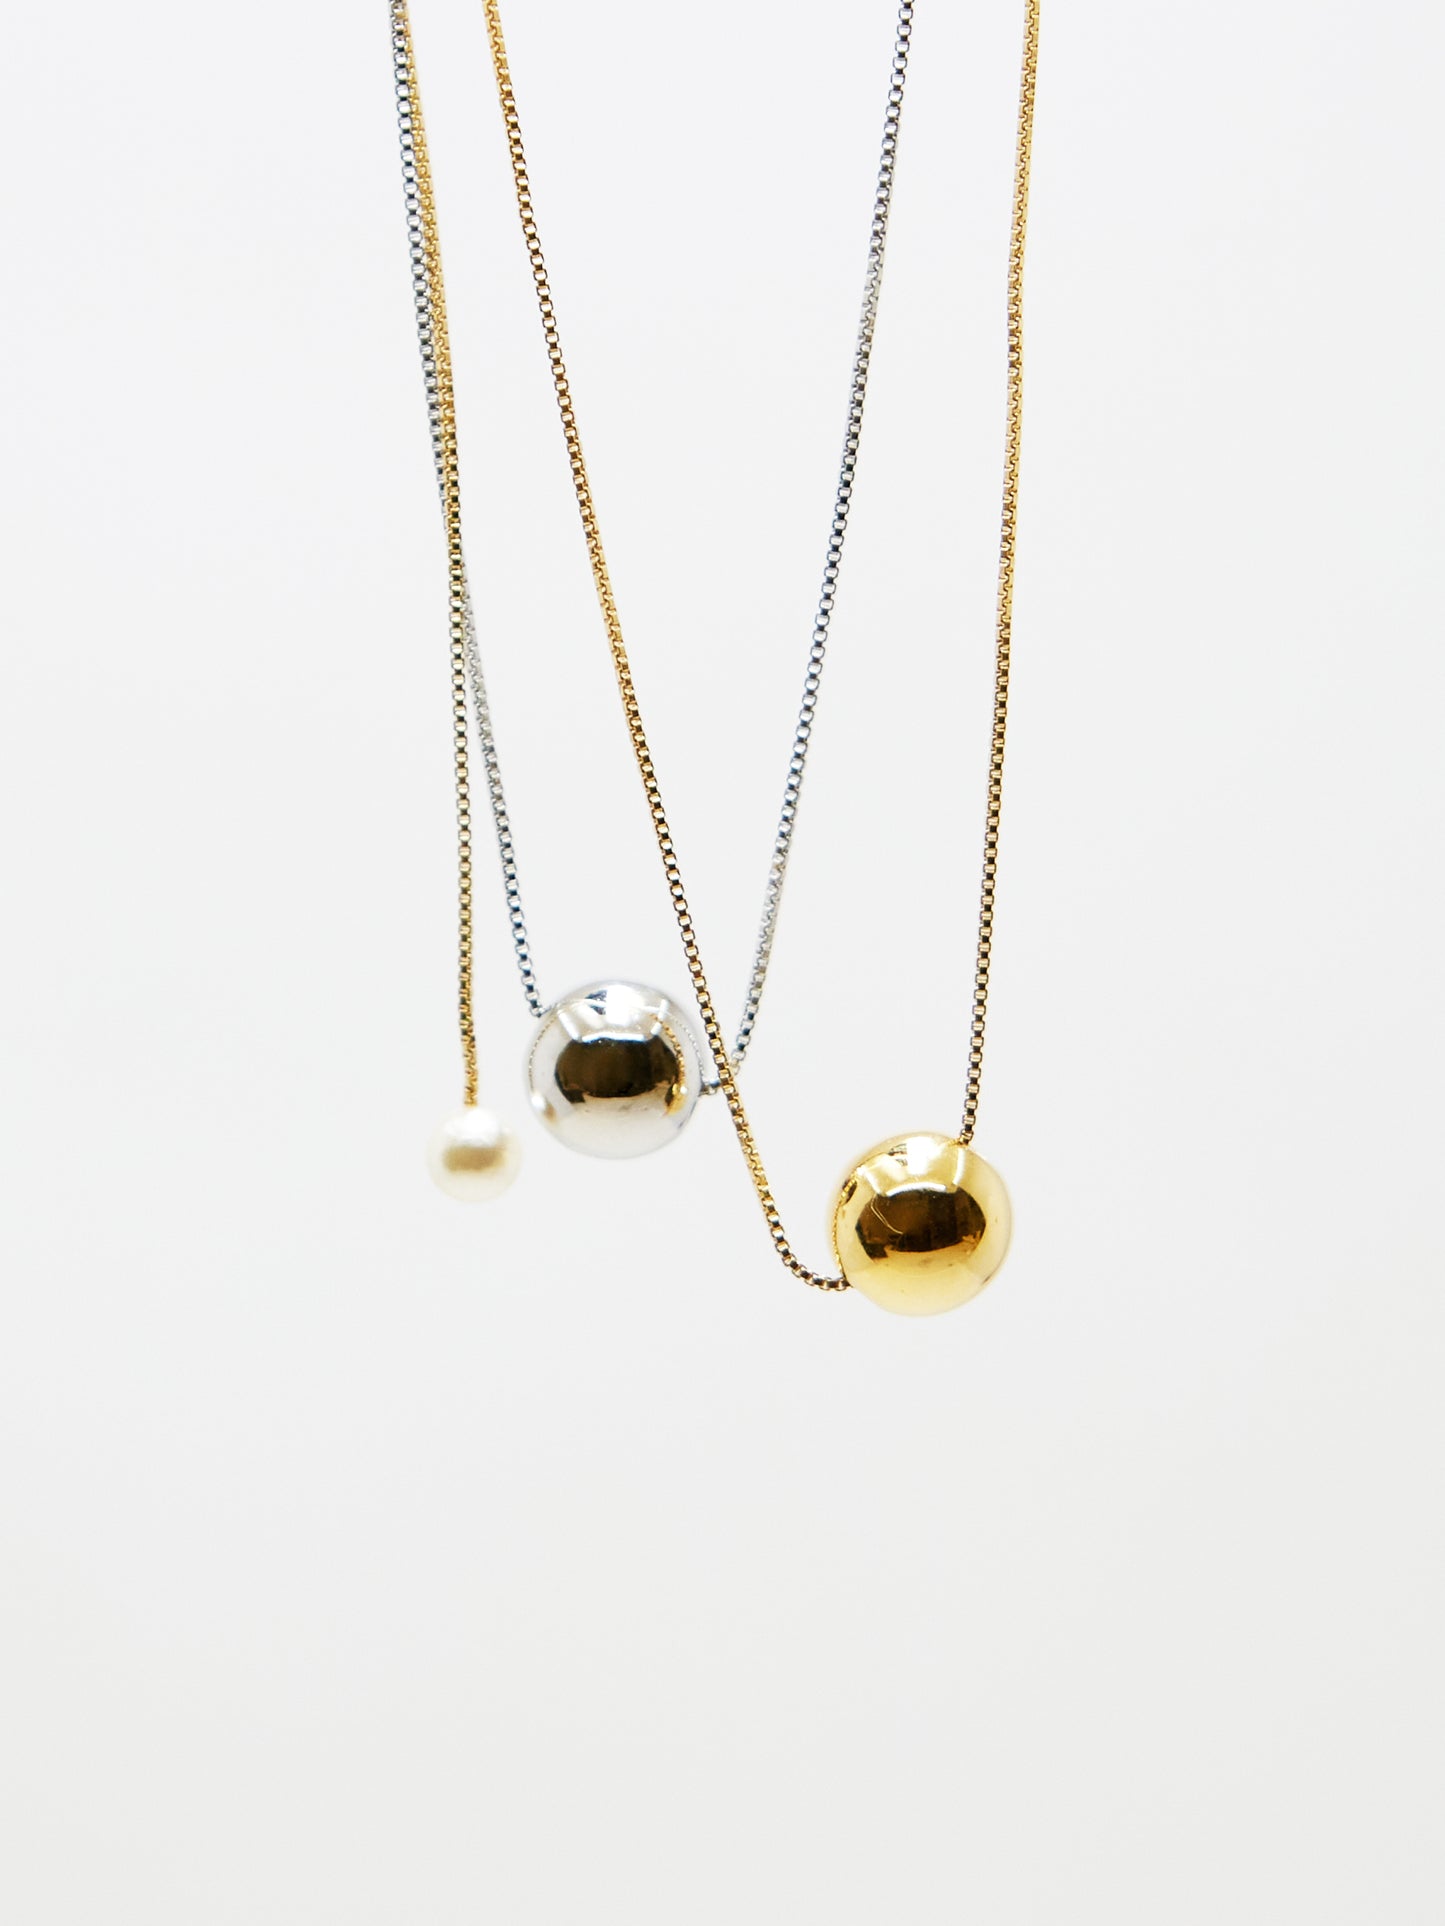 Simple ball necklace